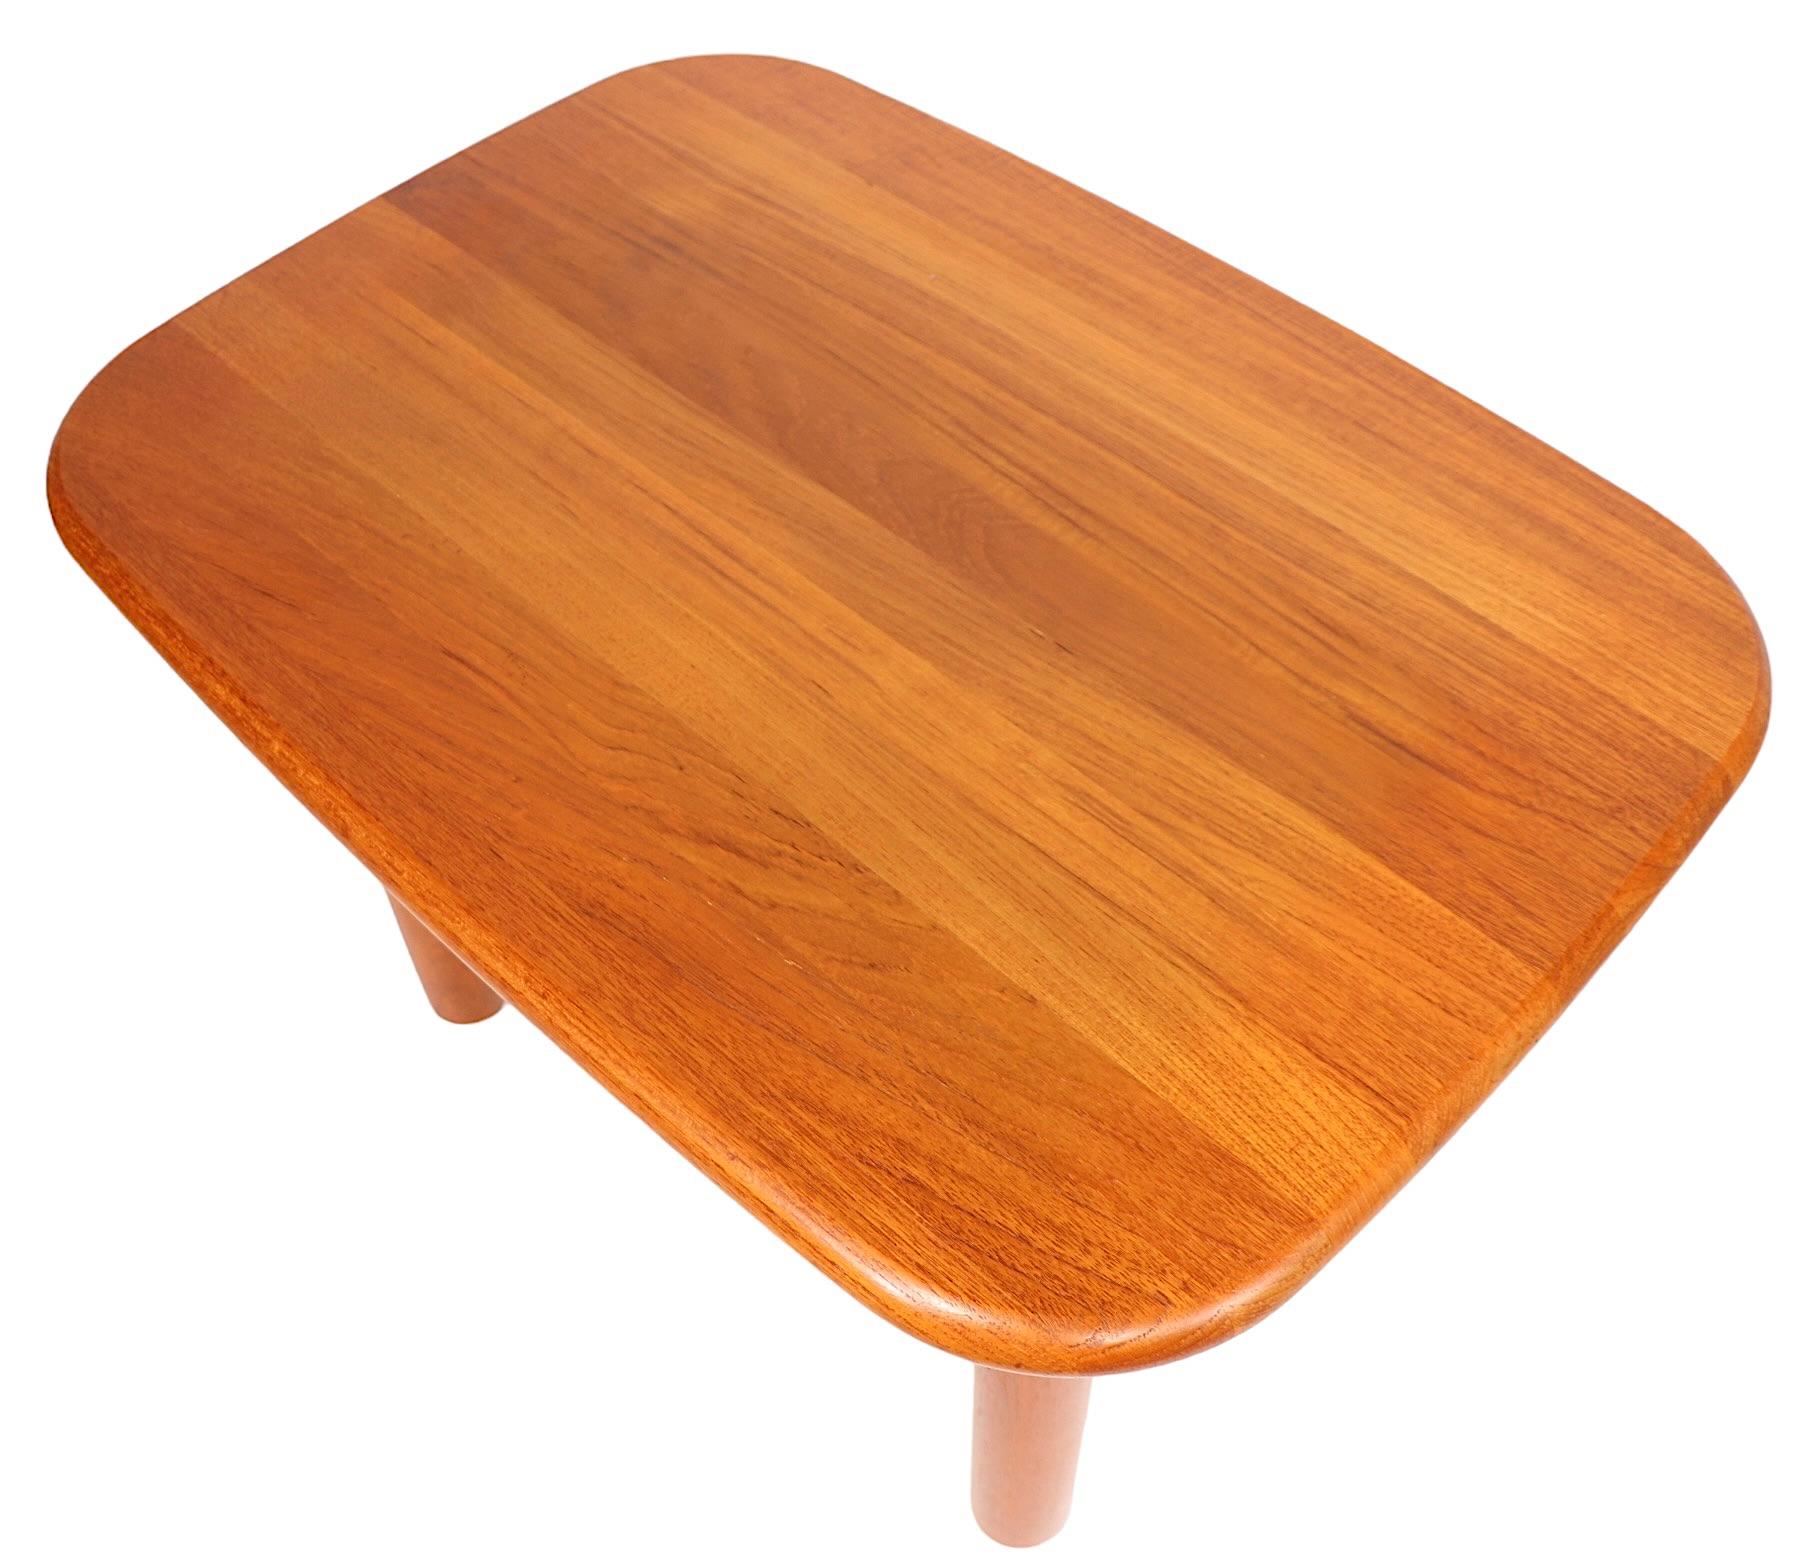  1970's Danish Modern Teak  End Table by Neils Bach  For Sale 3